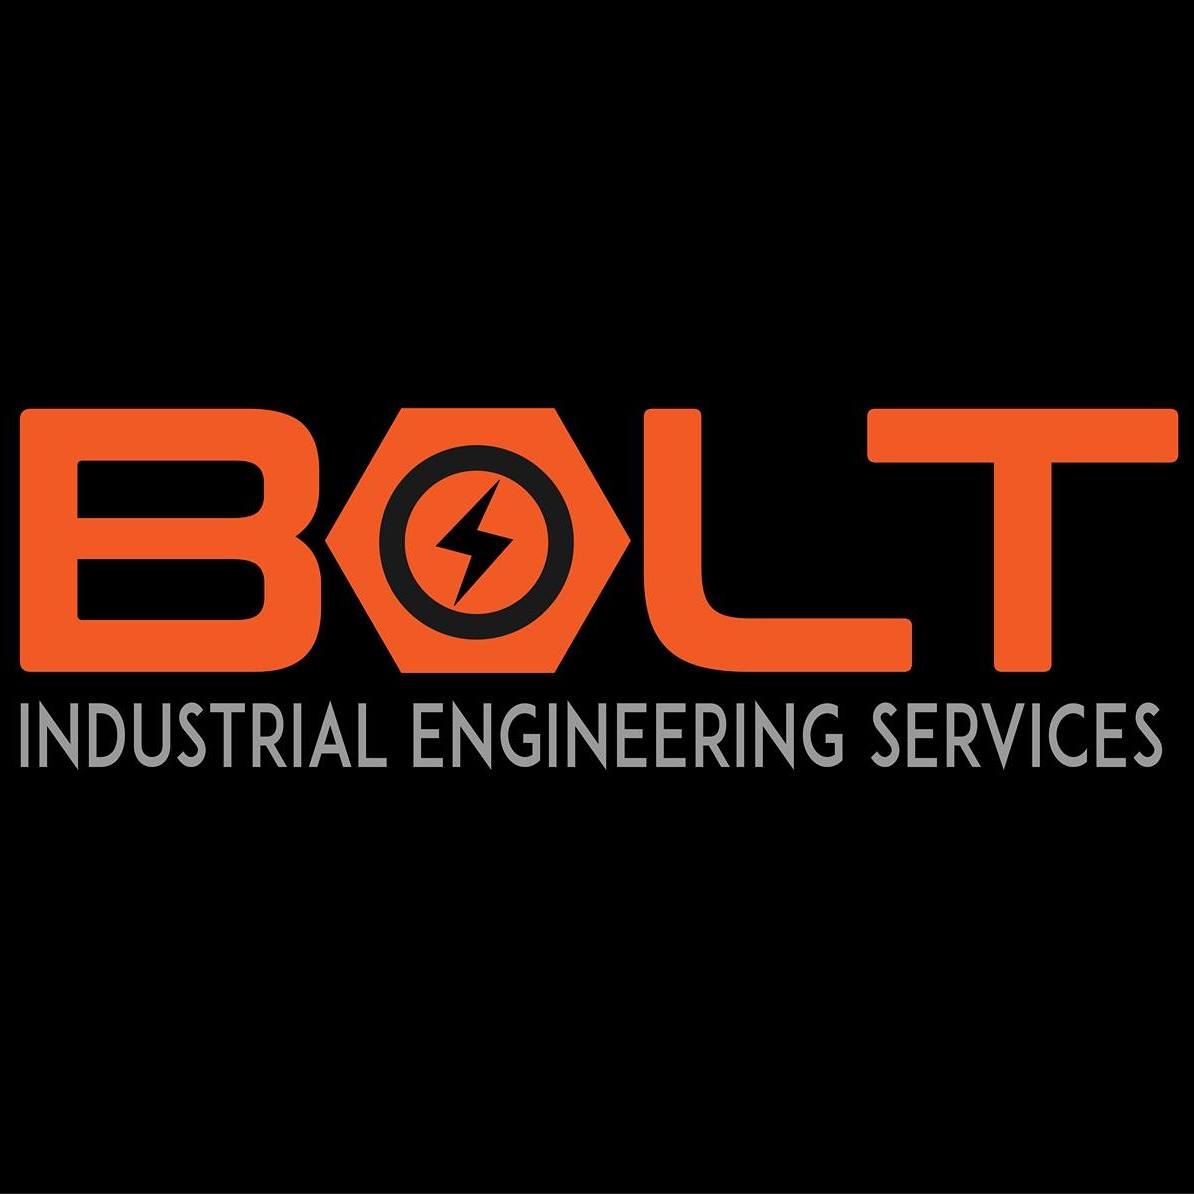 Logo of BOLT Industrial Engineering Services Ltd Industrial Engineers In St Ives, Cambridgeshire